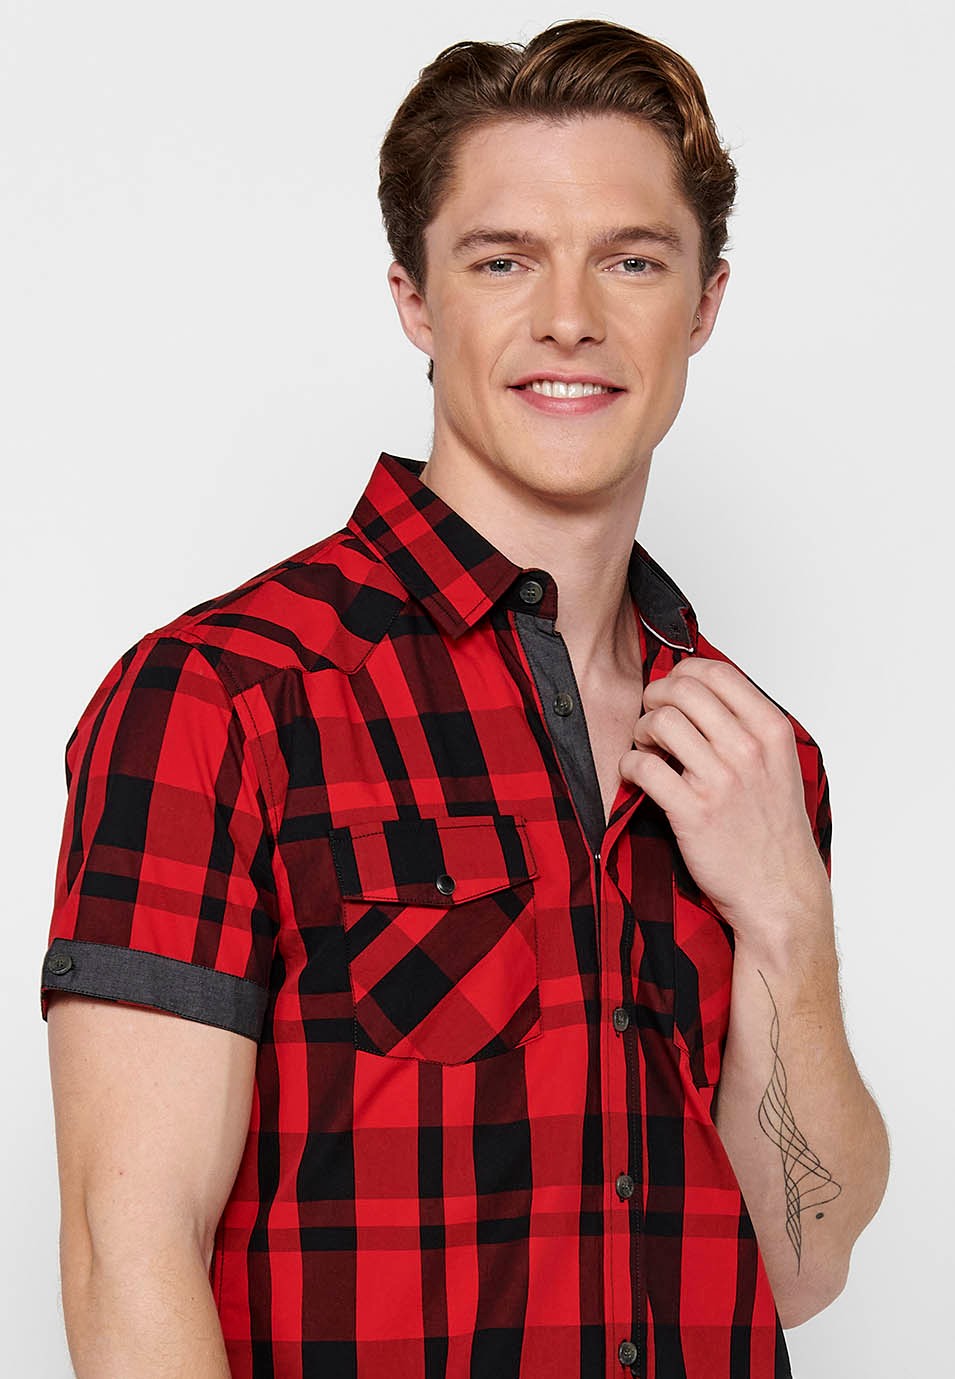 Short sleeve checked shirt, red and black color for men